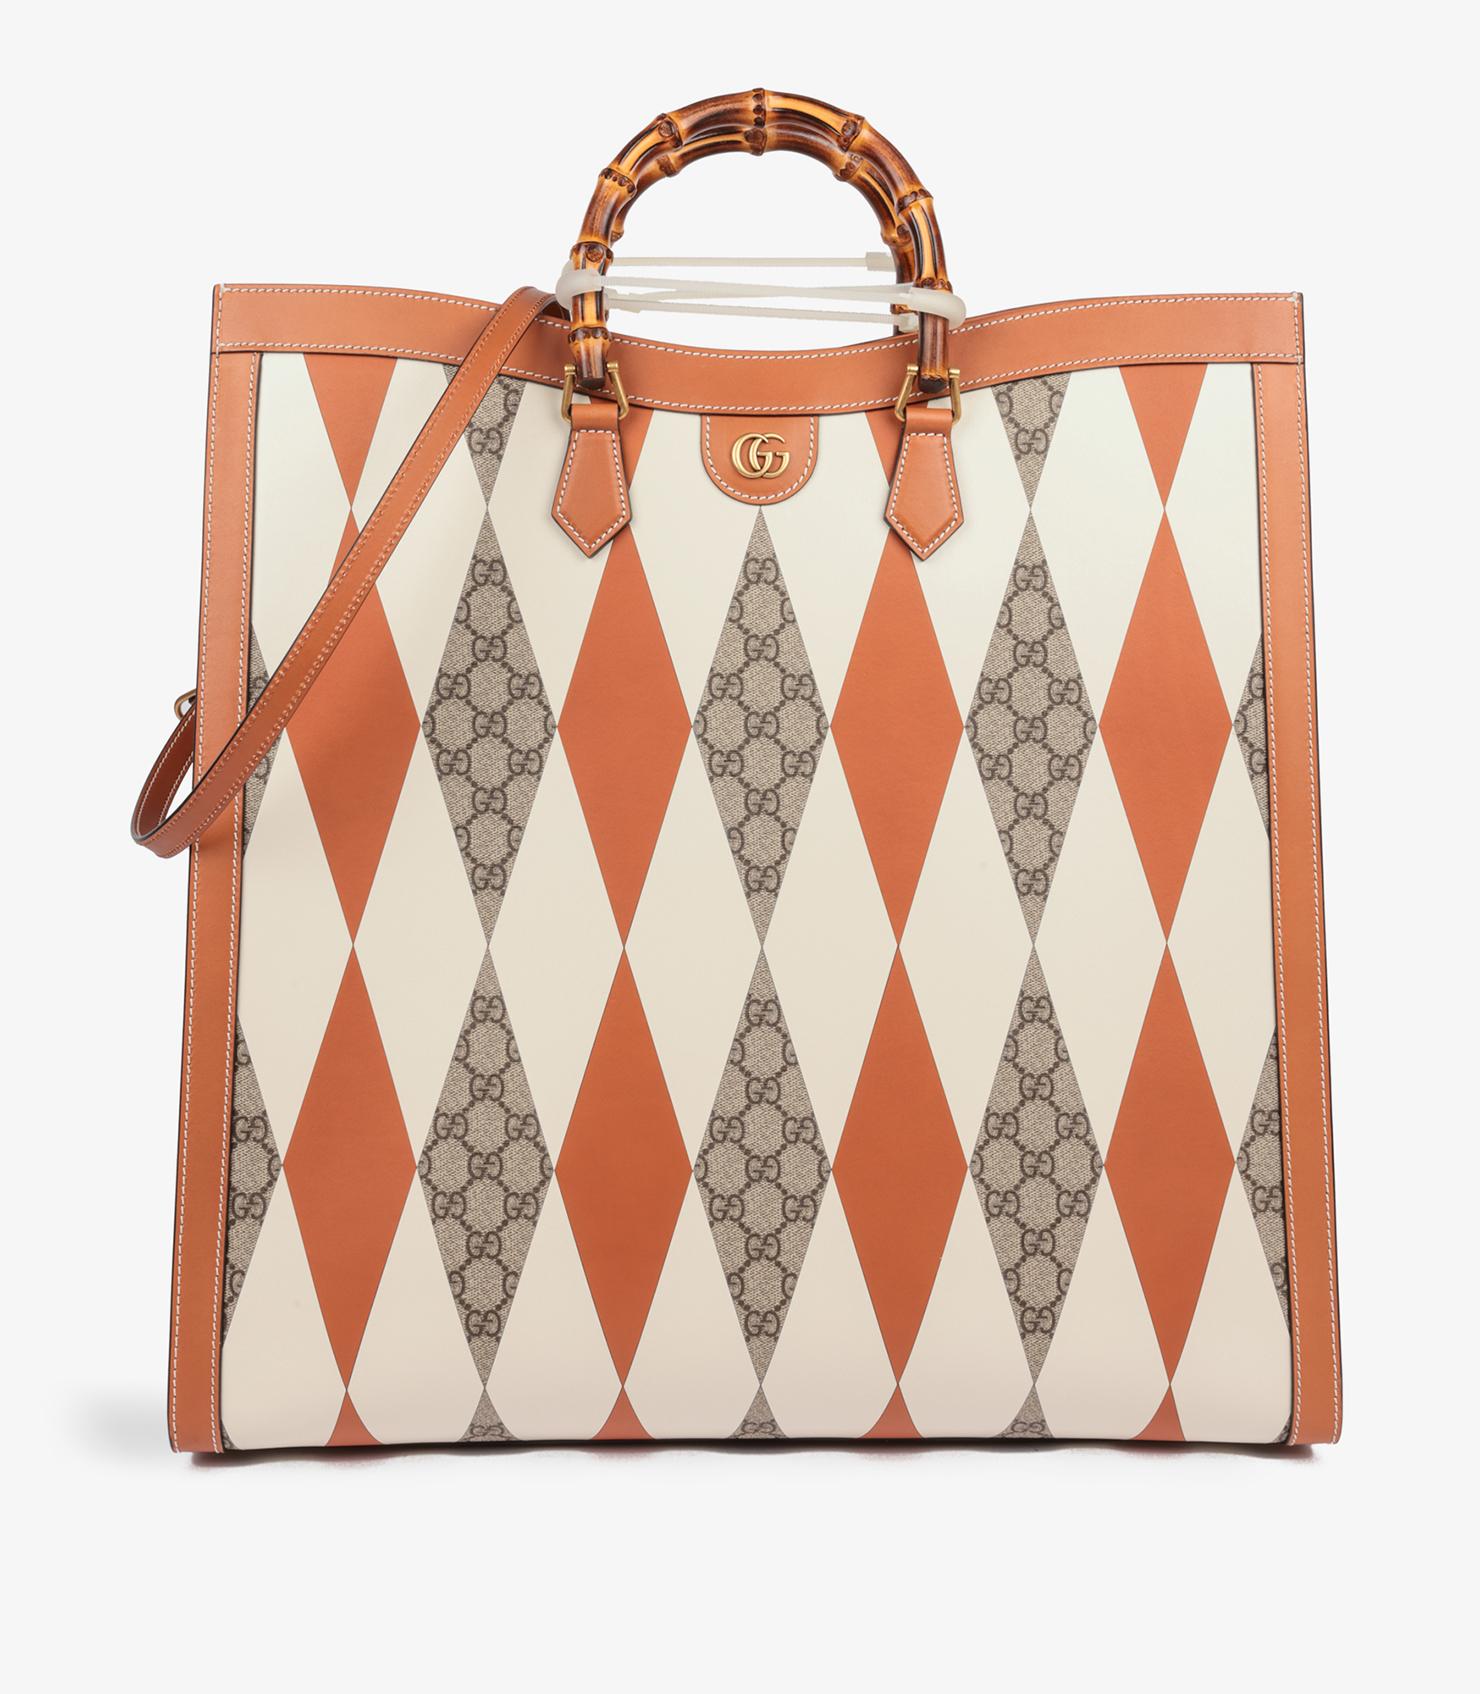 Gucci Brown, White & GG Supreme Coated Canvas Patchwork, Brown Calfskin Leather Maxi Diana

Brand- Gucci
Model- Maxi Diana 
Product Type- Crossbody, Shoulder, Tote
Serial Number- 719289.,525040
Age- Circa 2022
Accompanied By- Gucci Dust Bag, Box,